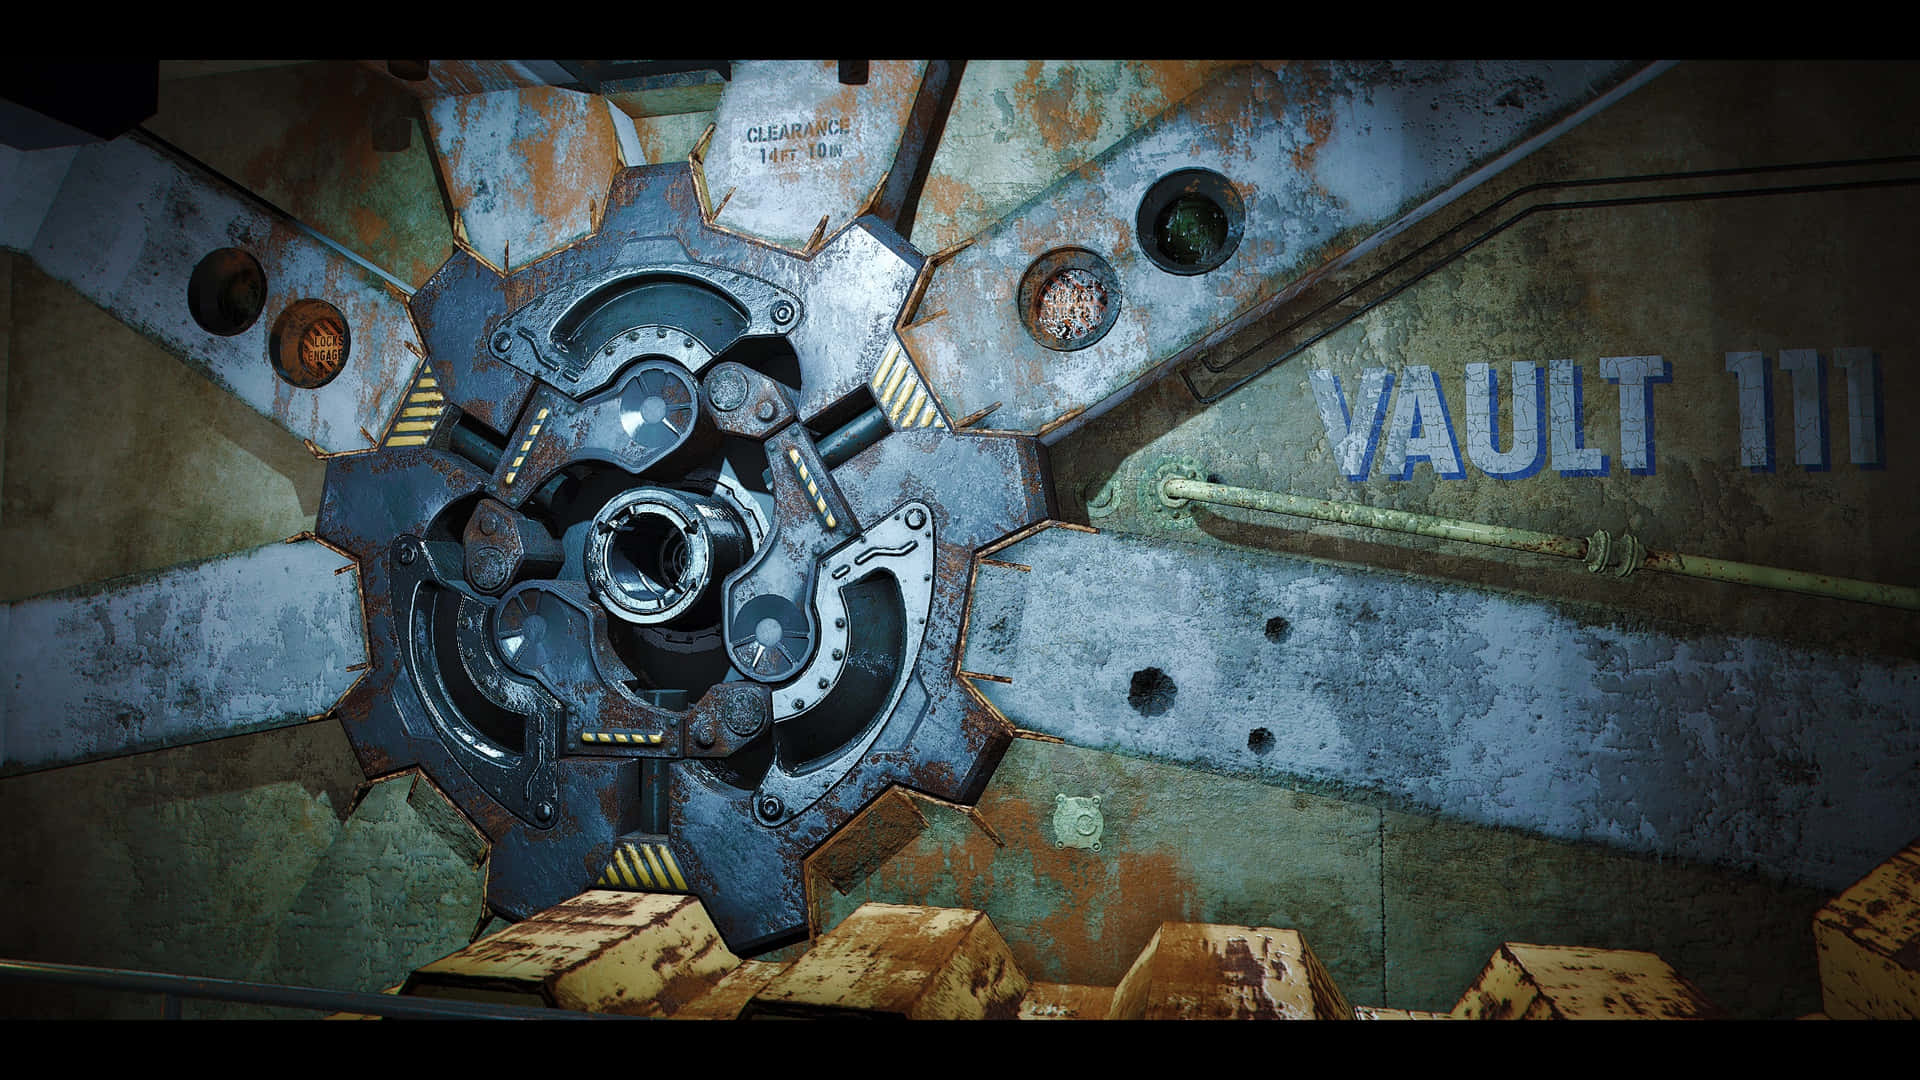 The Mysterious Fallout 4 Vault Entrance Wallpaper